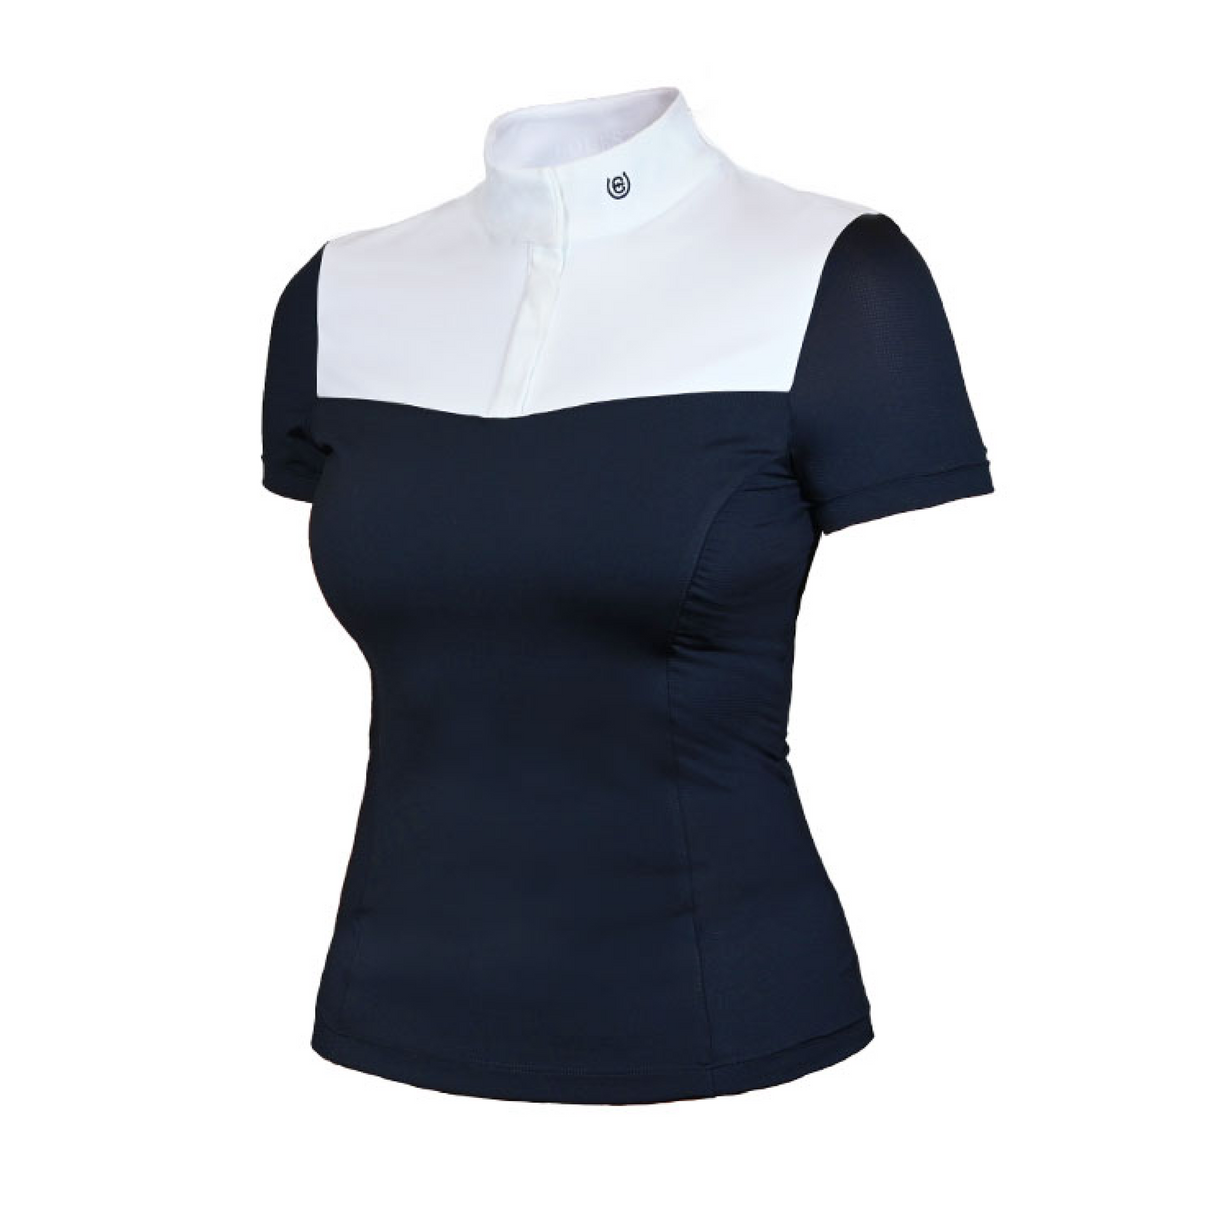 Equestrian Stockholm Refined Short Sleeve Competition Top Navy White